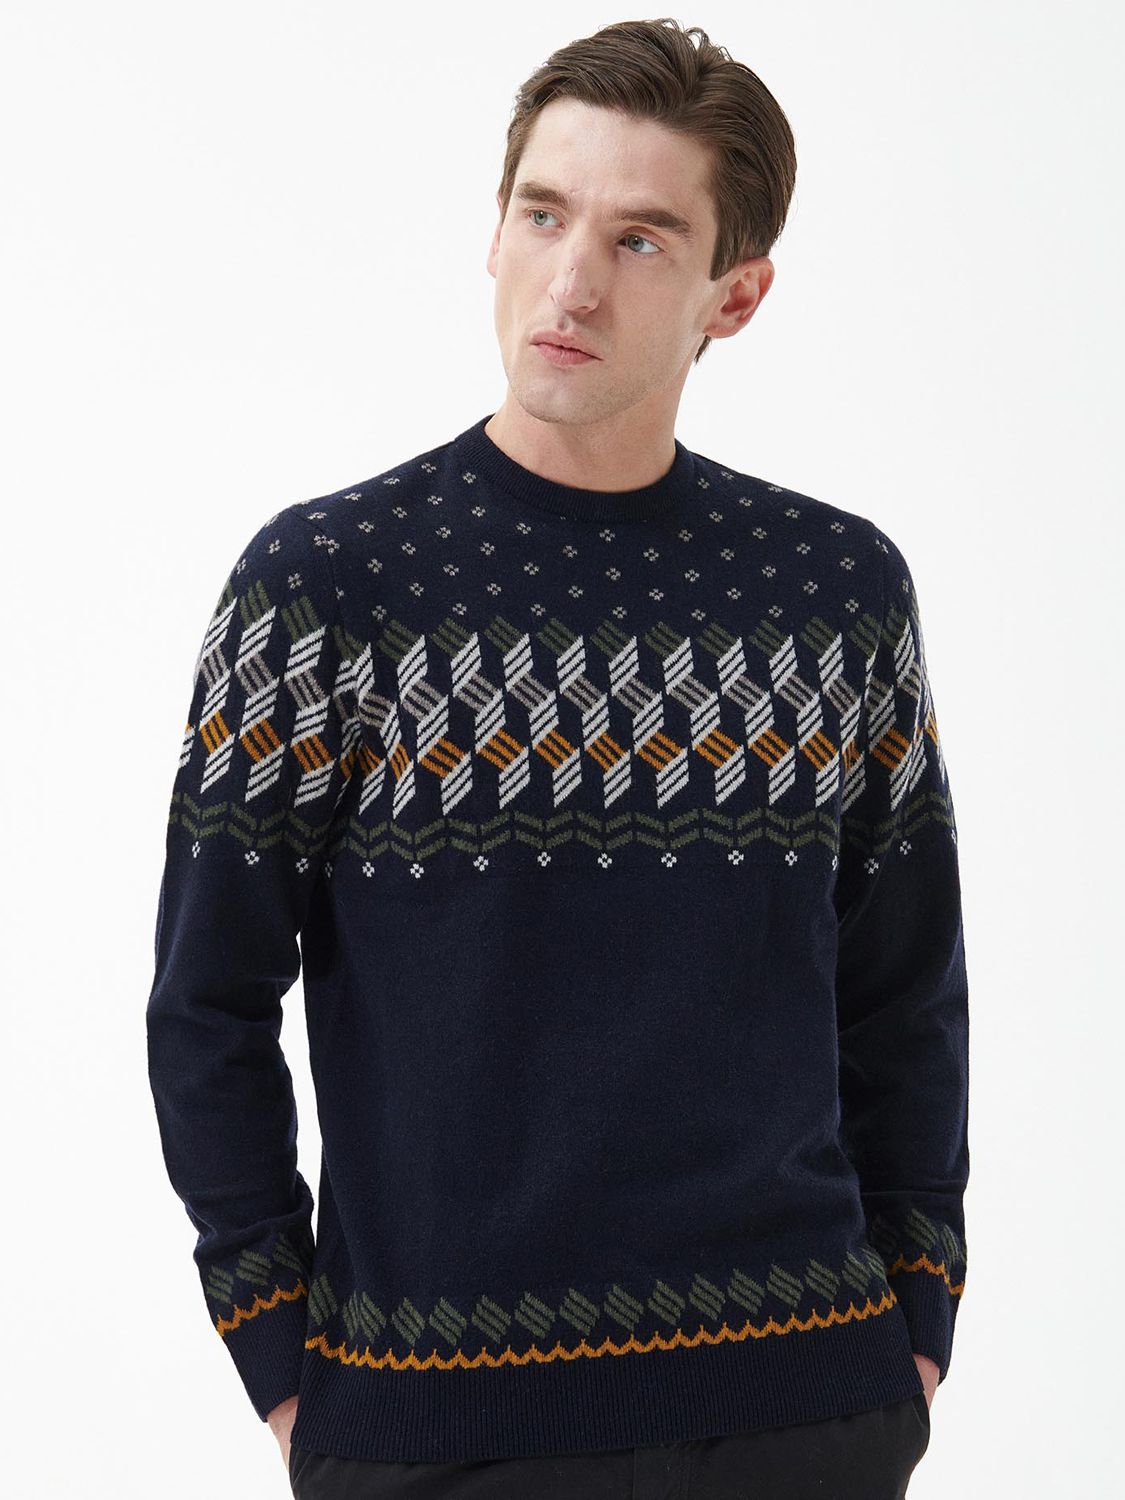 Barbour Abstract Fair Isle Crew Neck Jumper, Navy at John Lewis & Partners